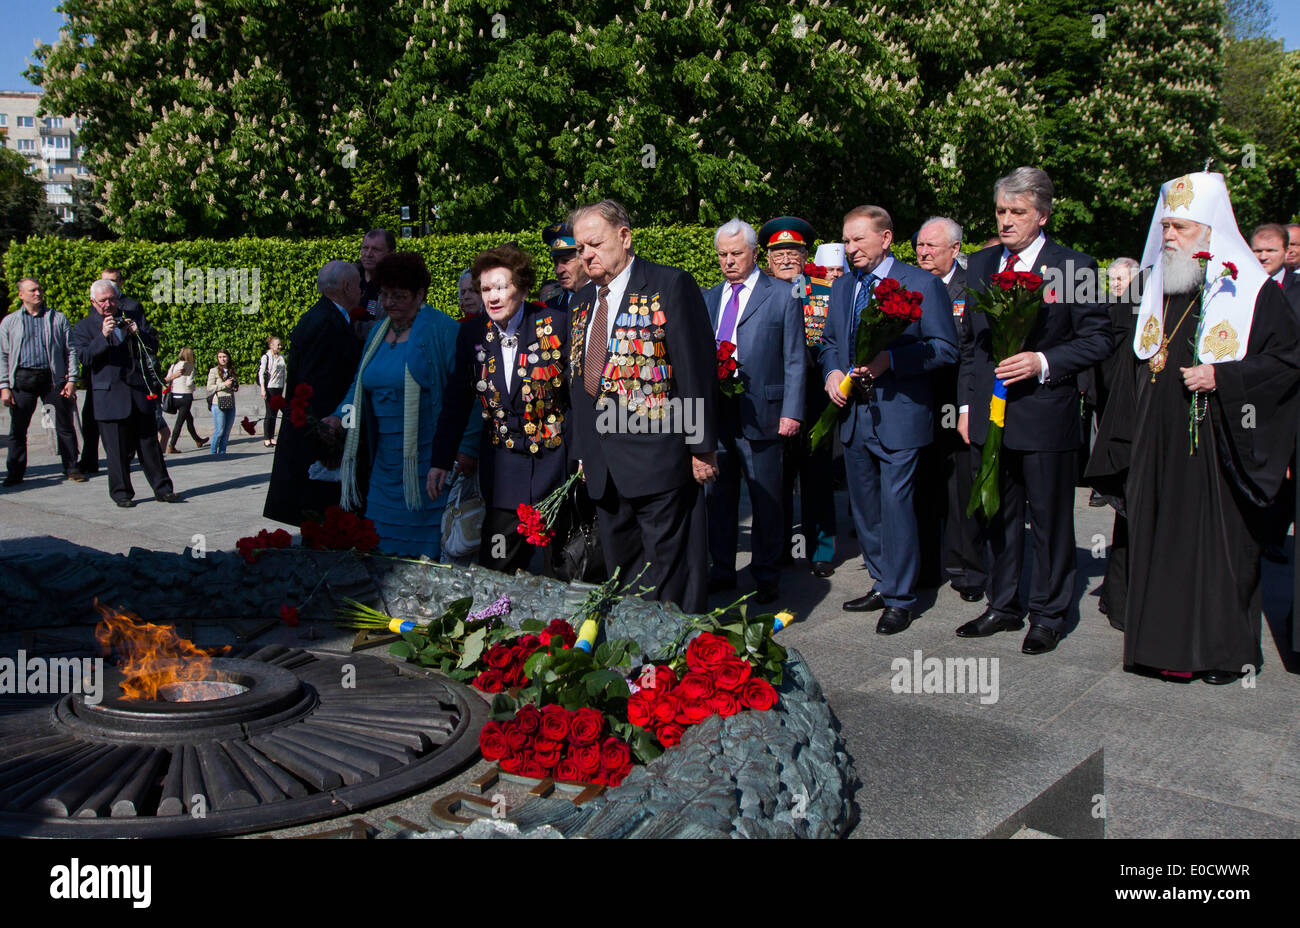 Kiev, Ukraine. 9th May, 2014. Three ex-presidents of Ukraine (from left) Leonid Kravchuk, Leonid Kuchma and Viktor Yushchenko lay flovers at the Memorial of Eternal Glory during a commemoration ceremony to mark the 69th anniversary of Victory in the Great Patriotic War Credit:  Sergii Kharchenko/NurPhoto/ZUMAPRESS.com/Alamy Live News Stock Photo